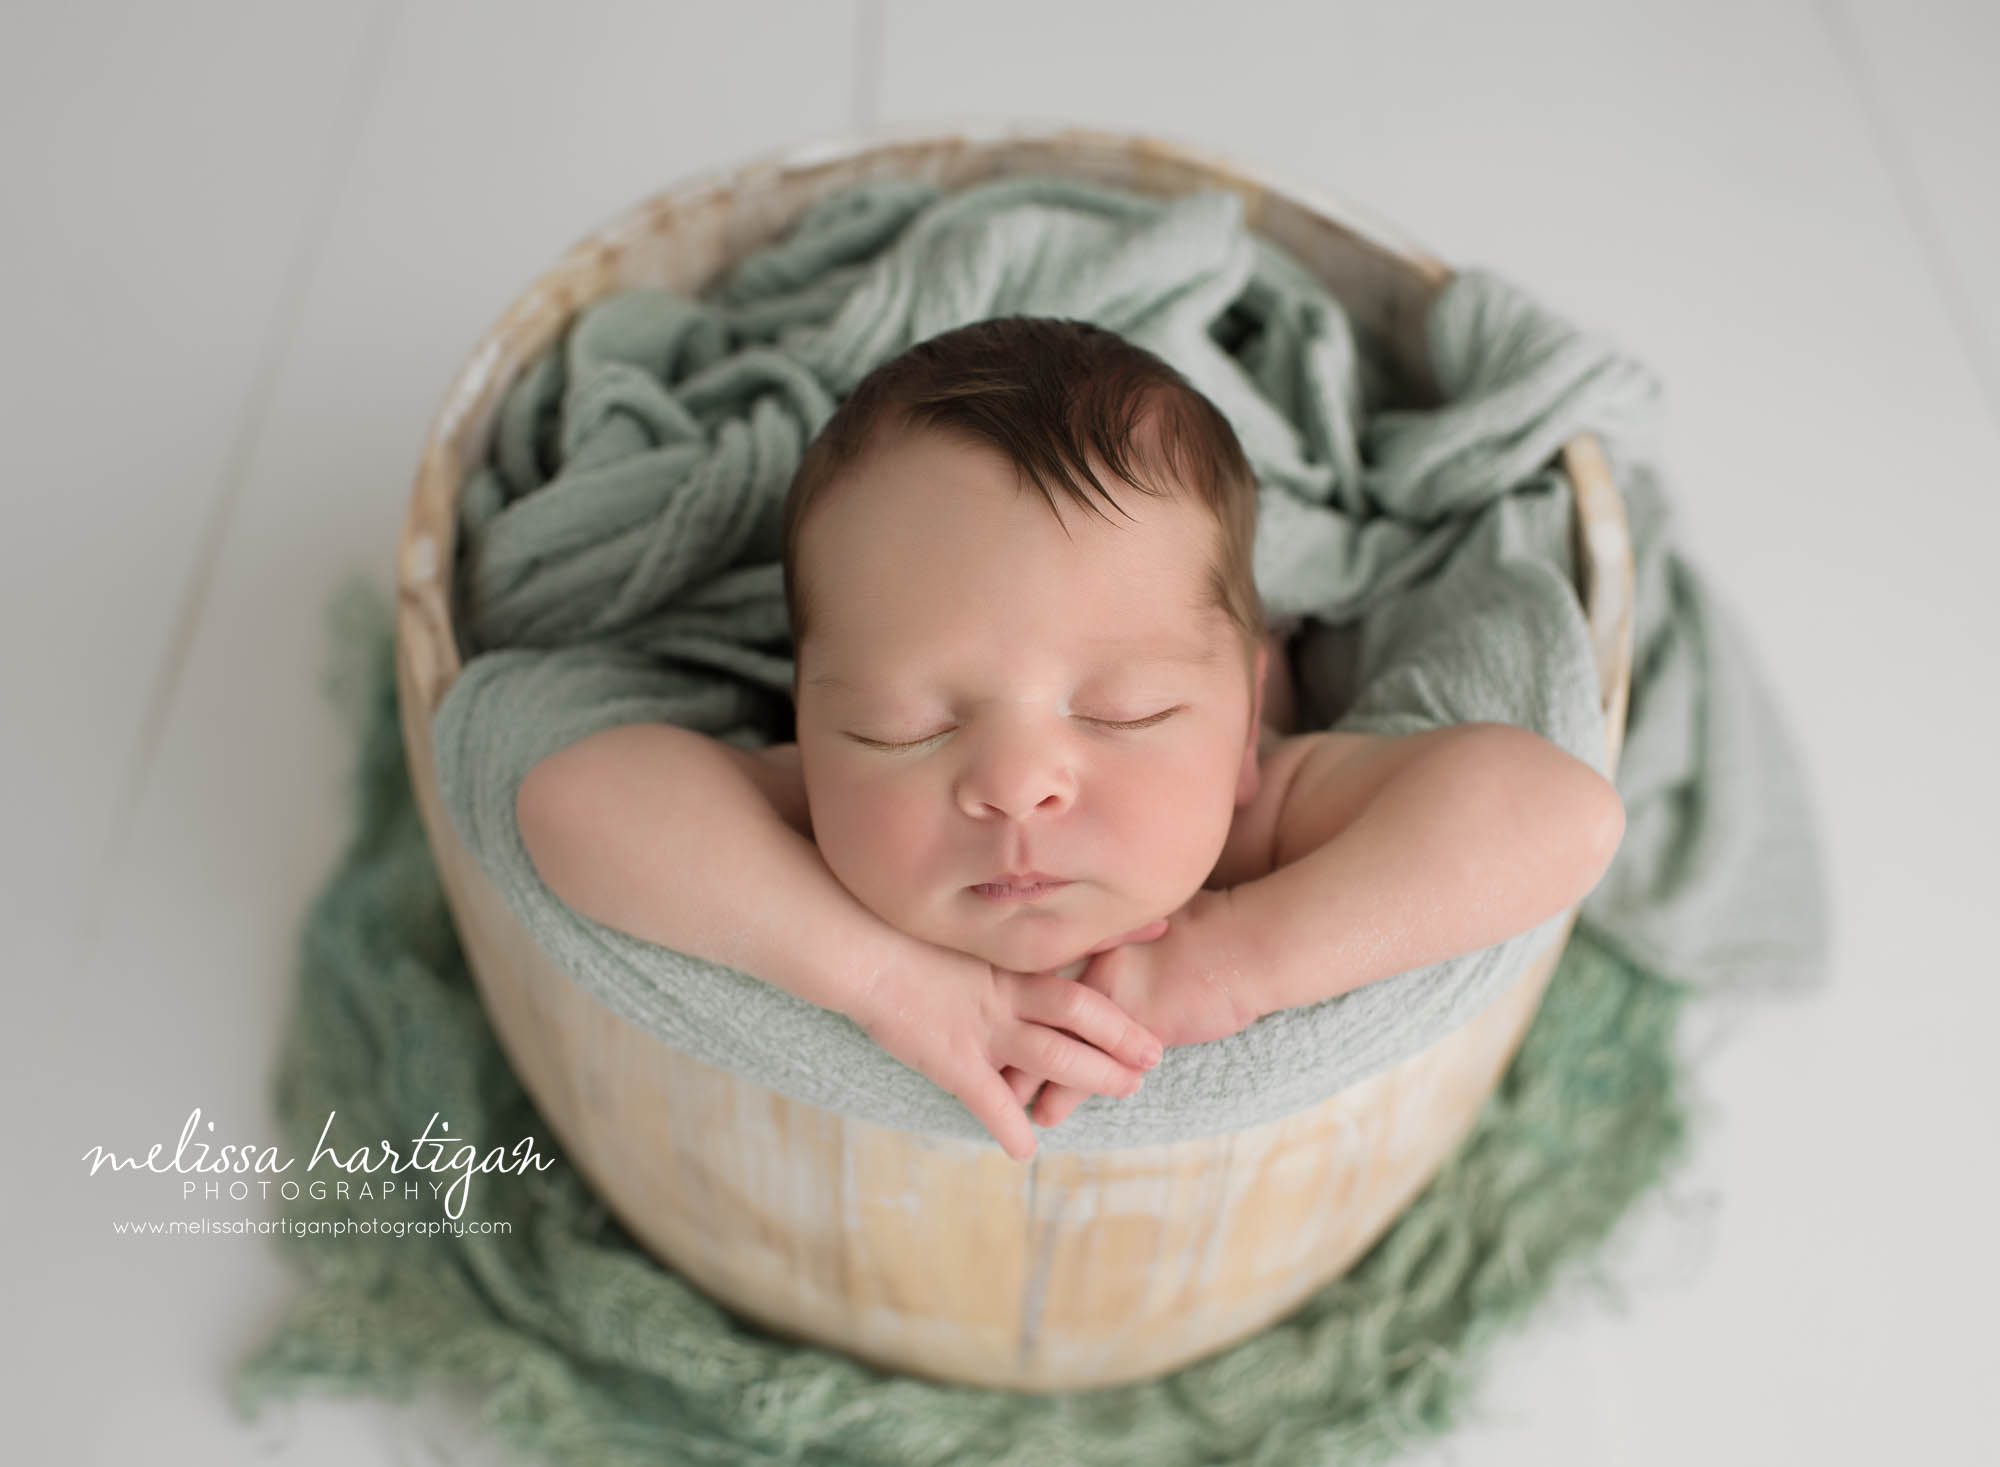 baby boy posed in wooden bucket with mint green layer wrap